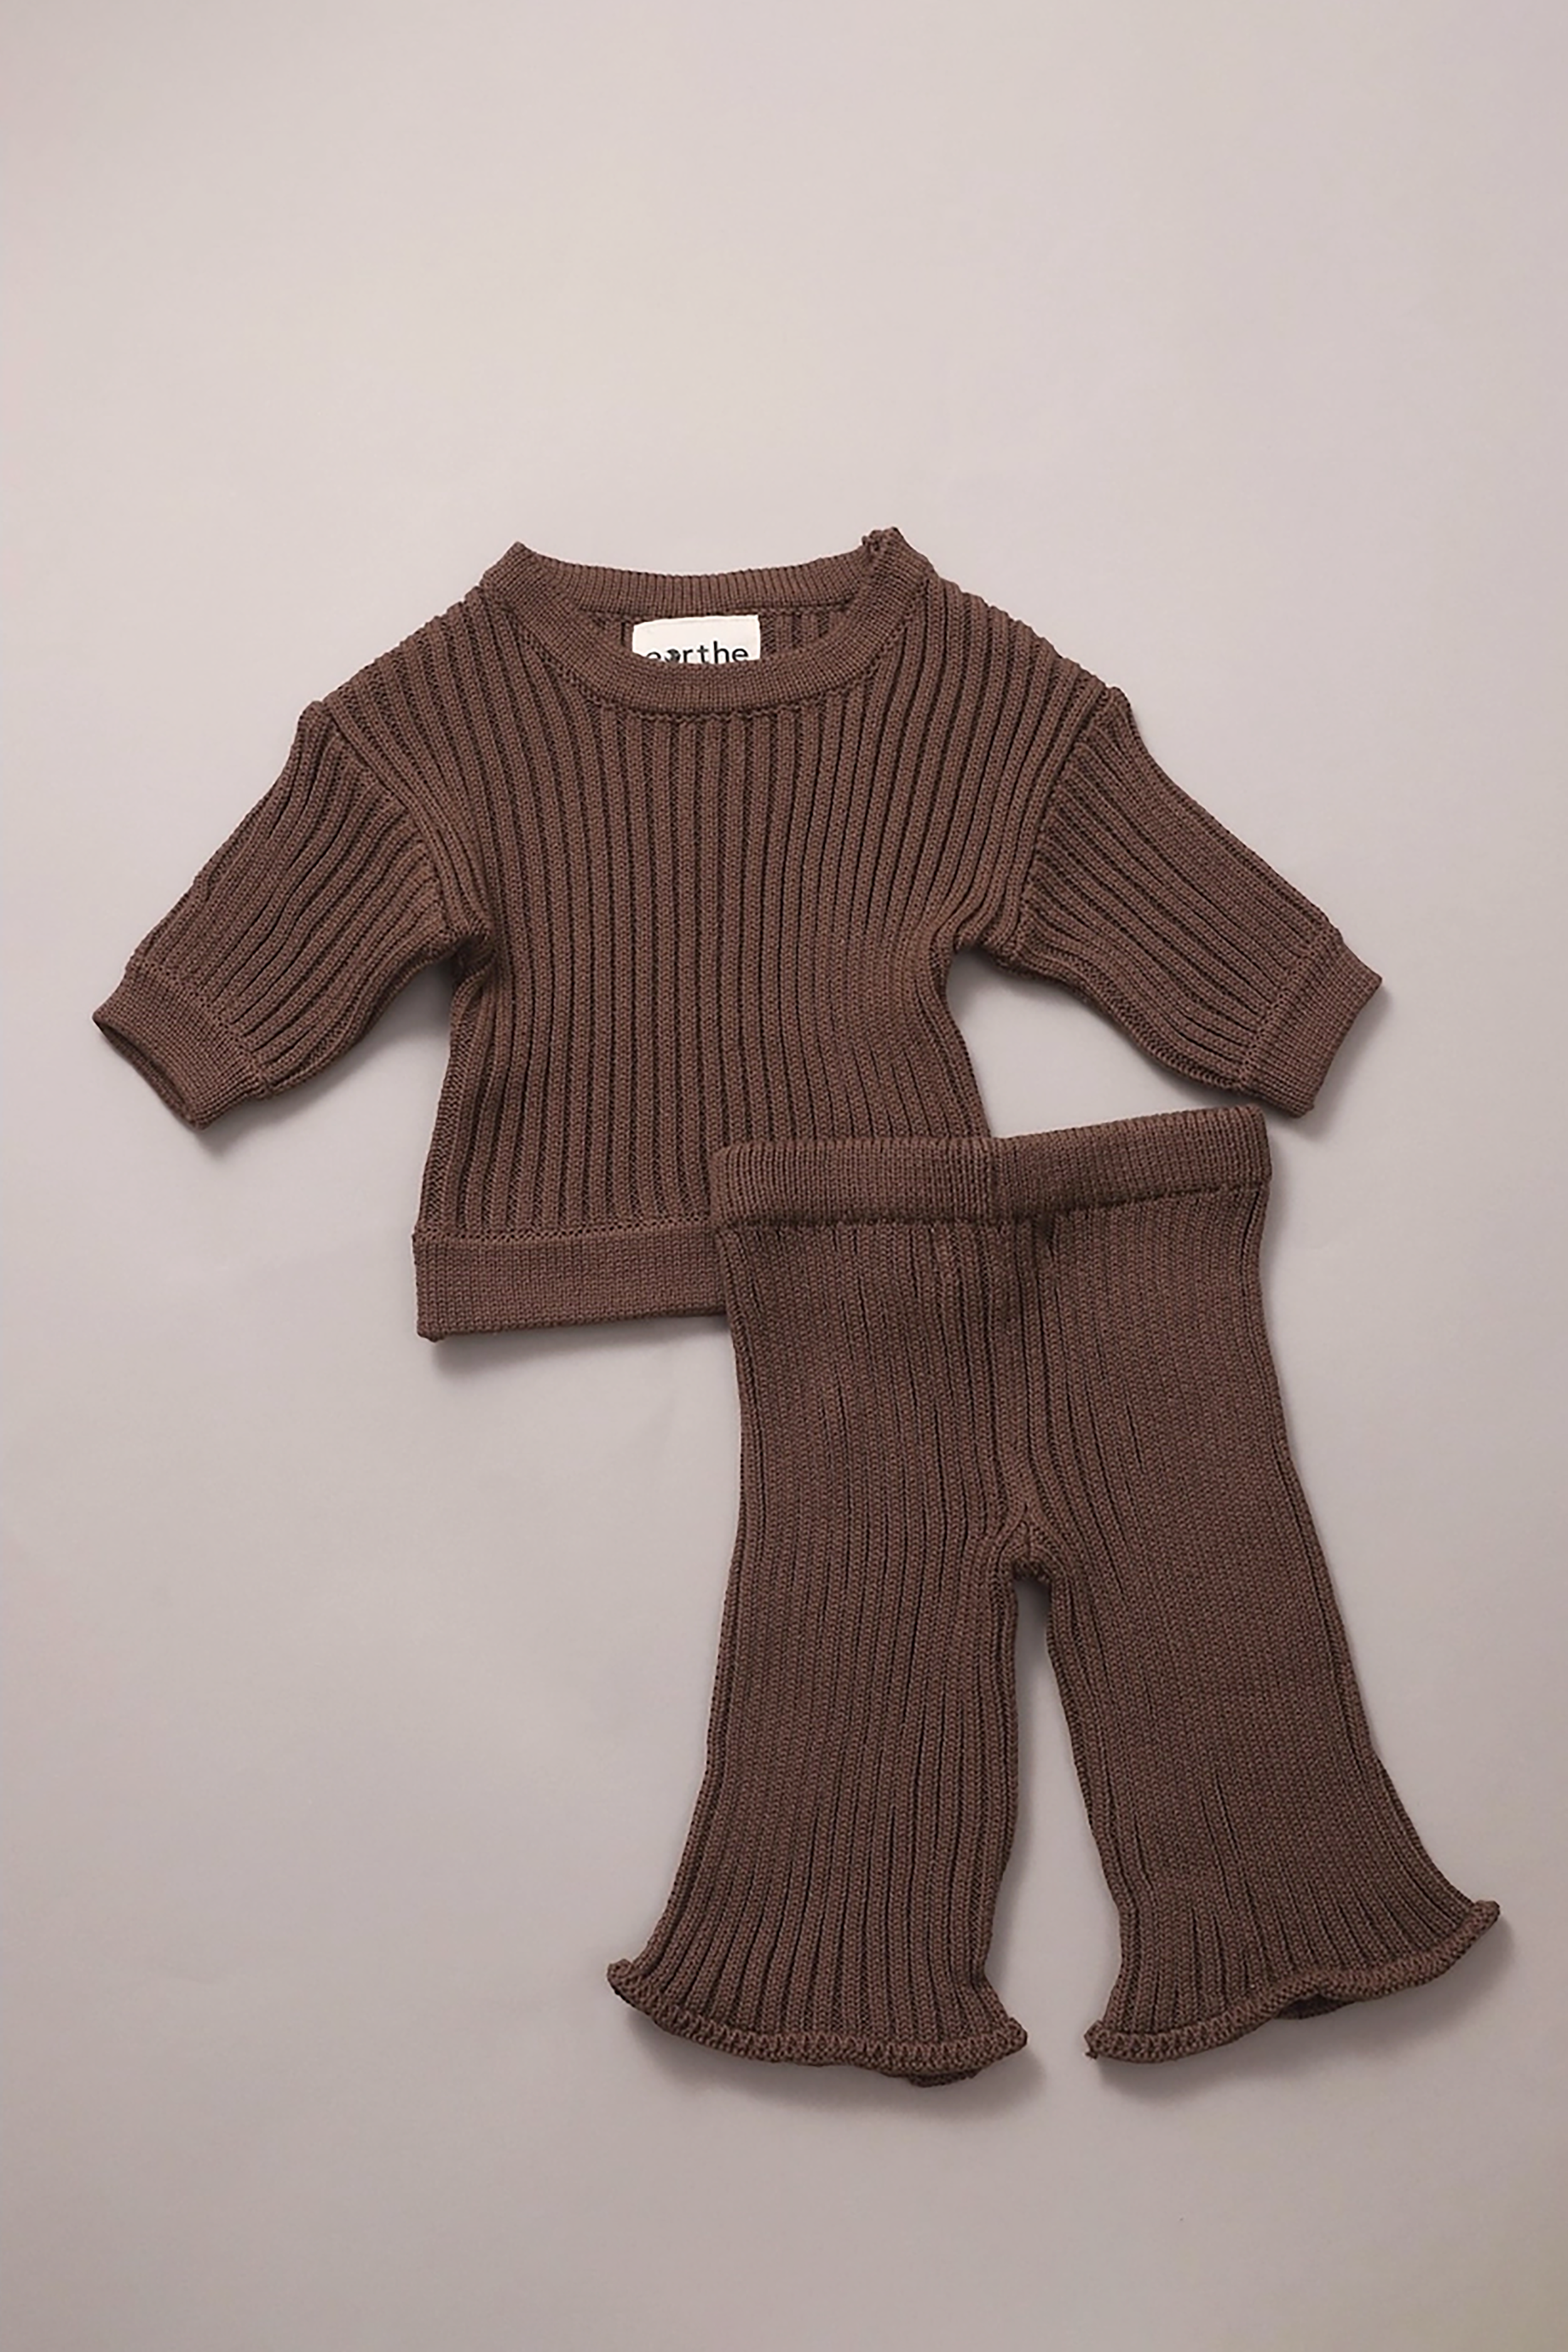 Knit Set in Chocolate